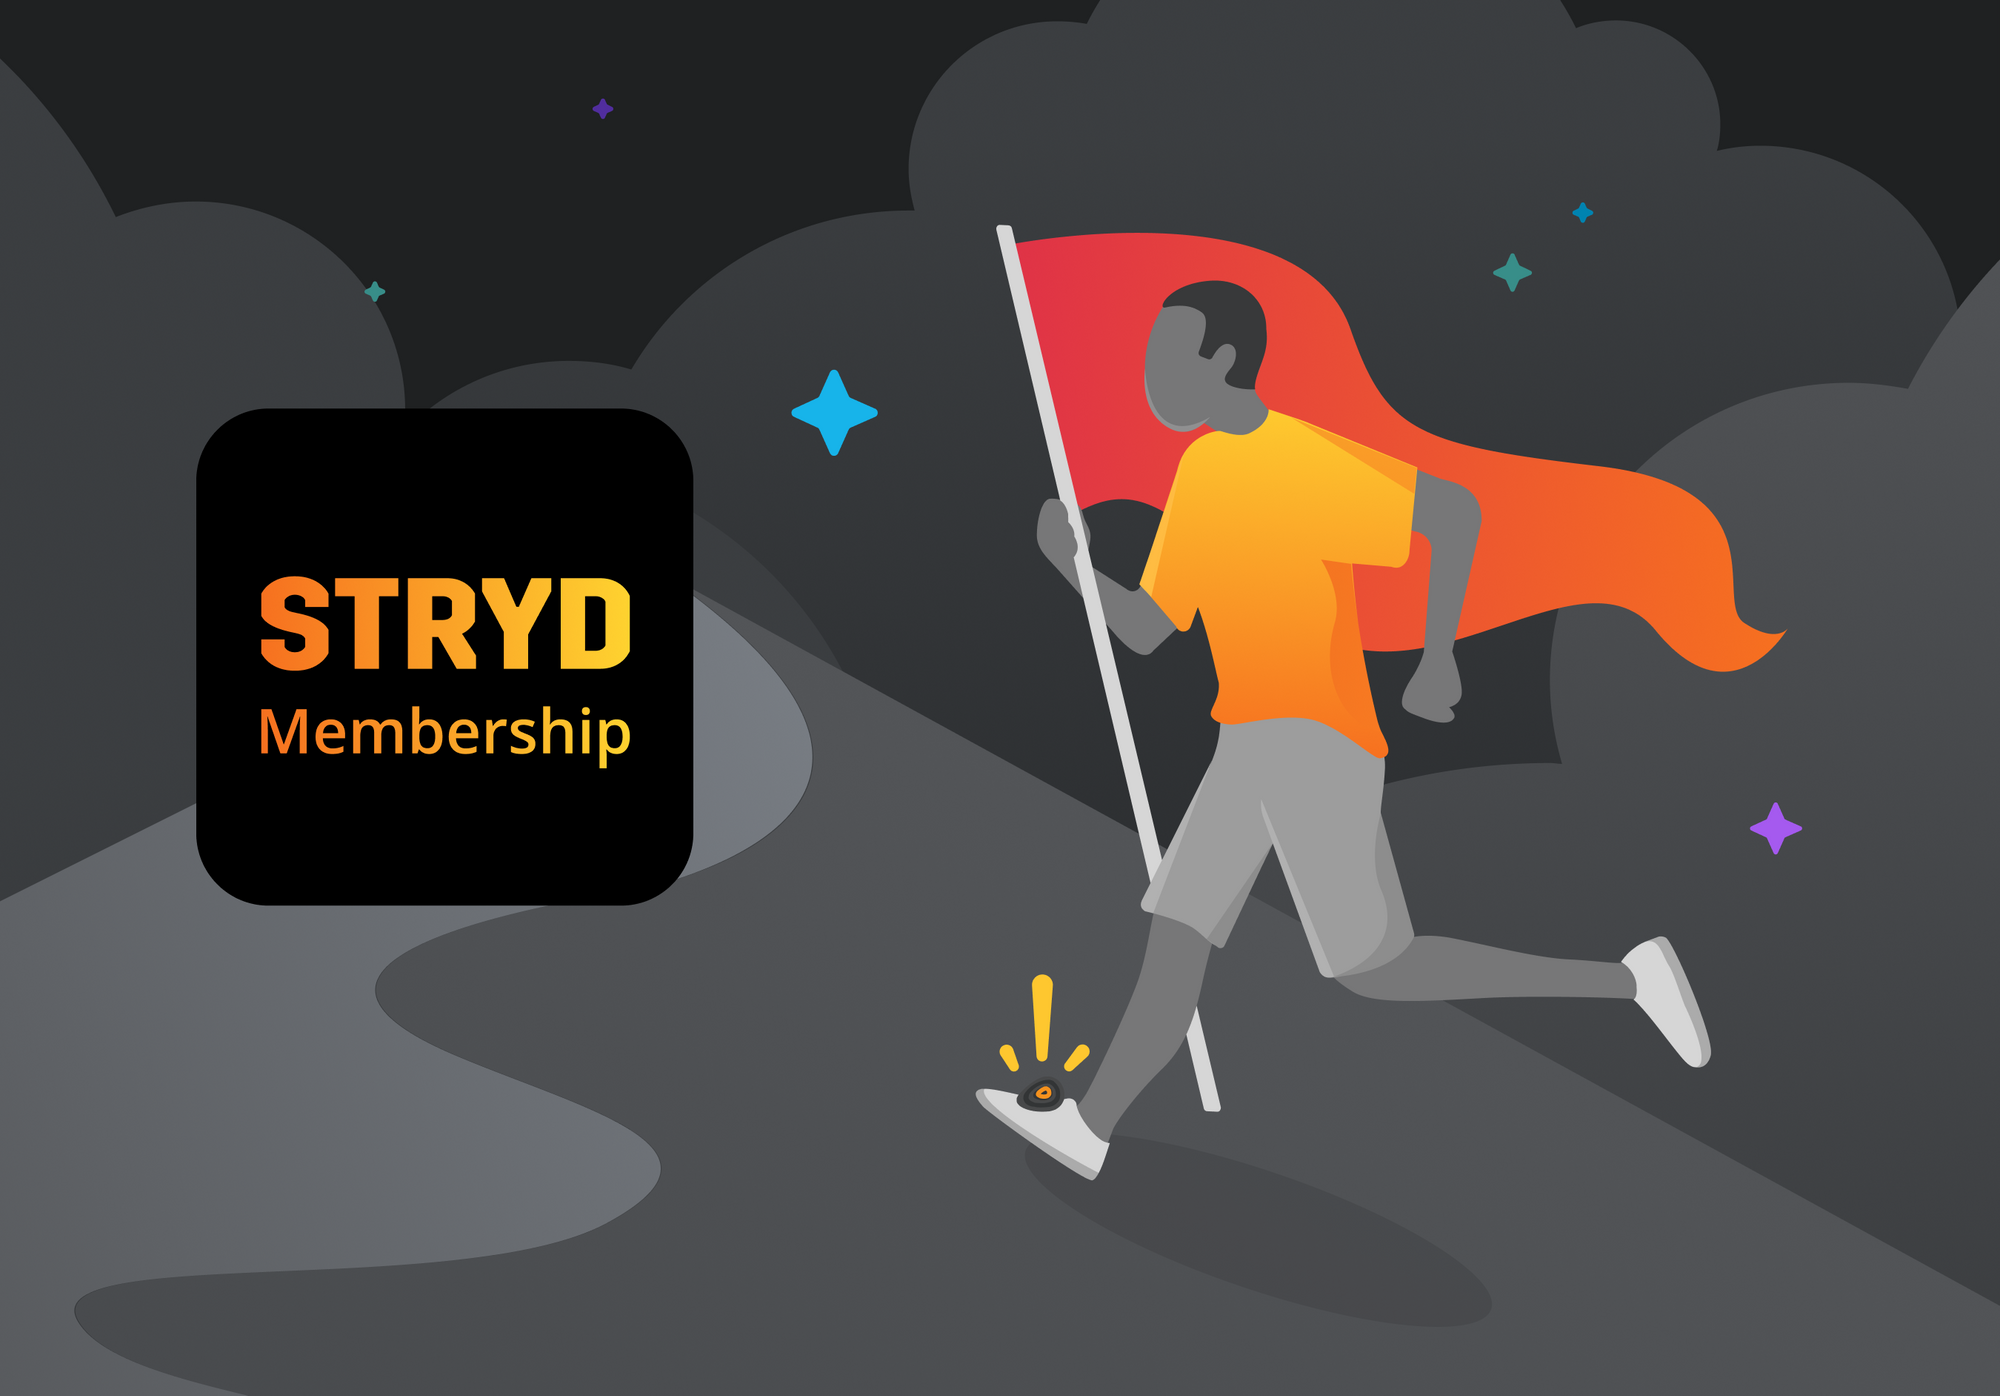 Stryd Membership is launching | New features